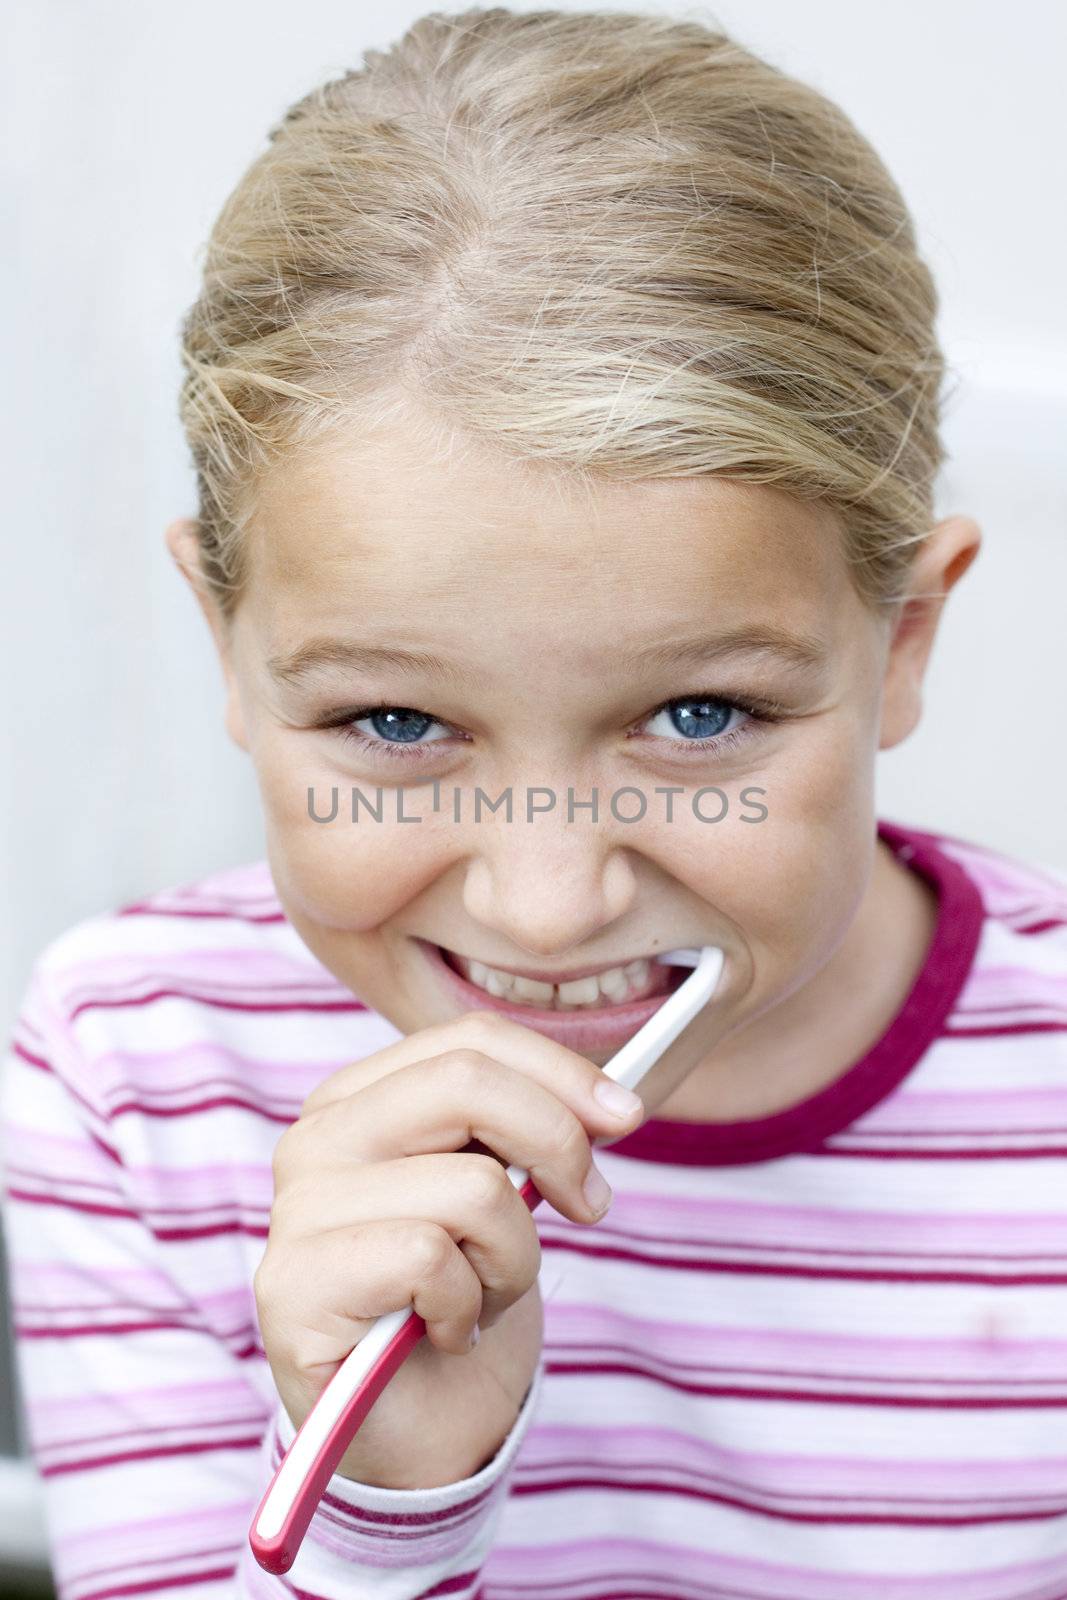 Portrait of young girl brushing teeth, isolated on white